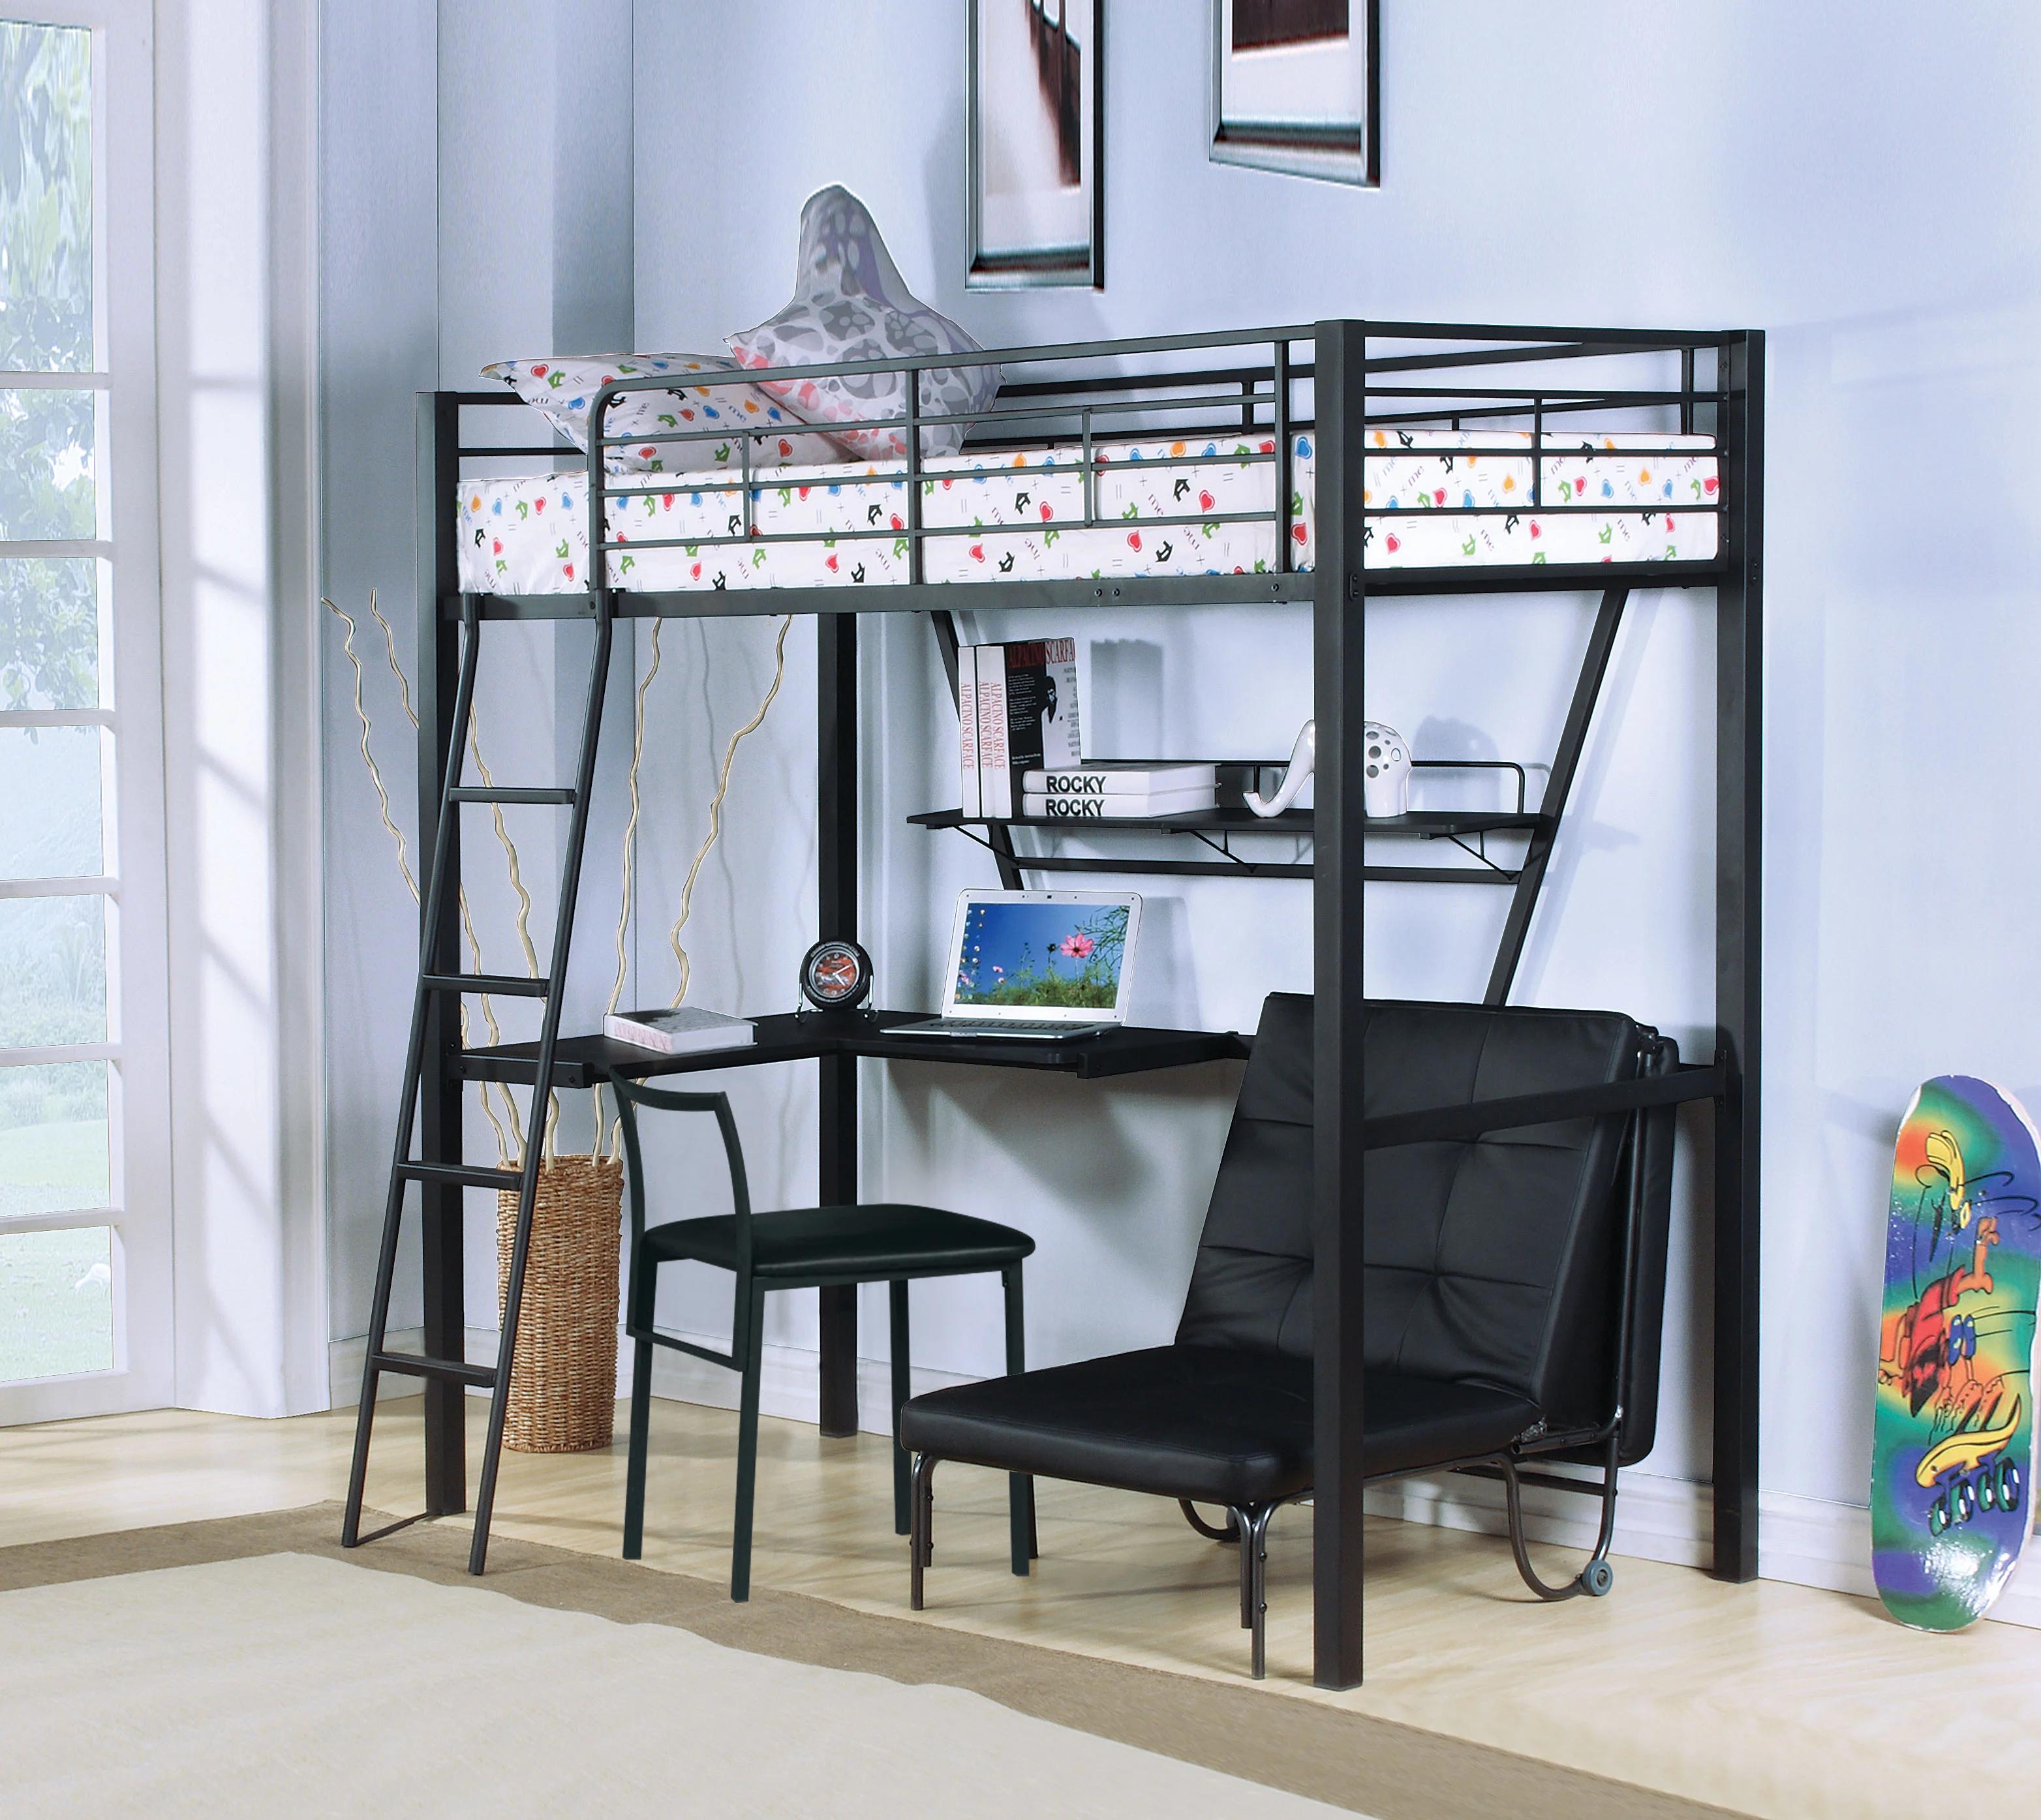 

    
Transitional Silver & Black Twin Loft Bed + Chair + Foldable Bed by Acme Senon 37275-3pcs
